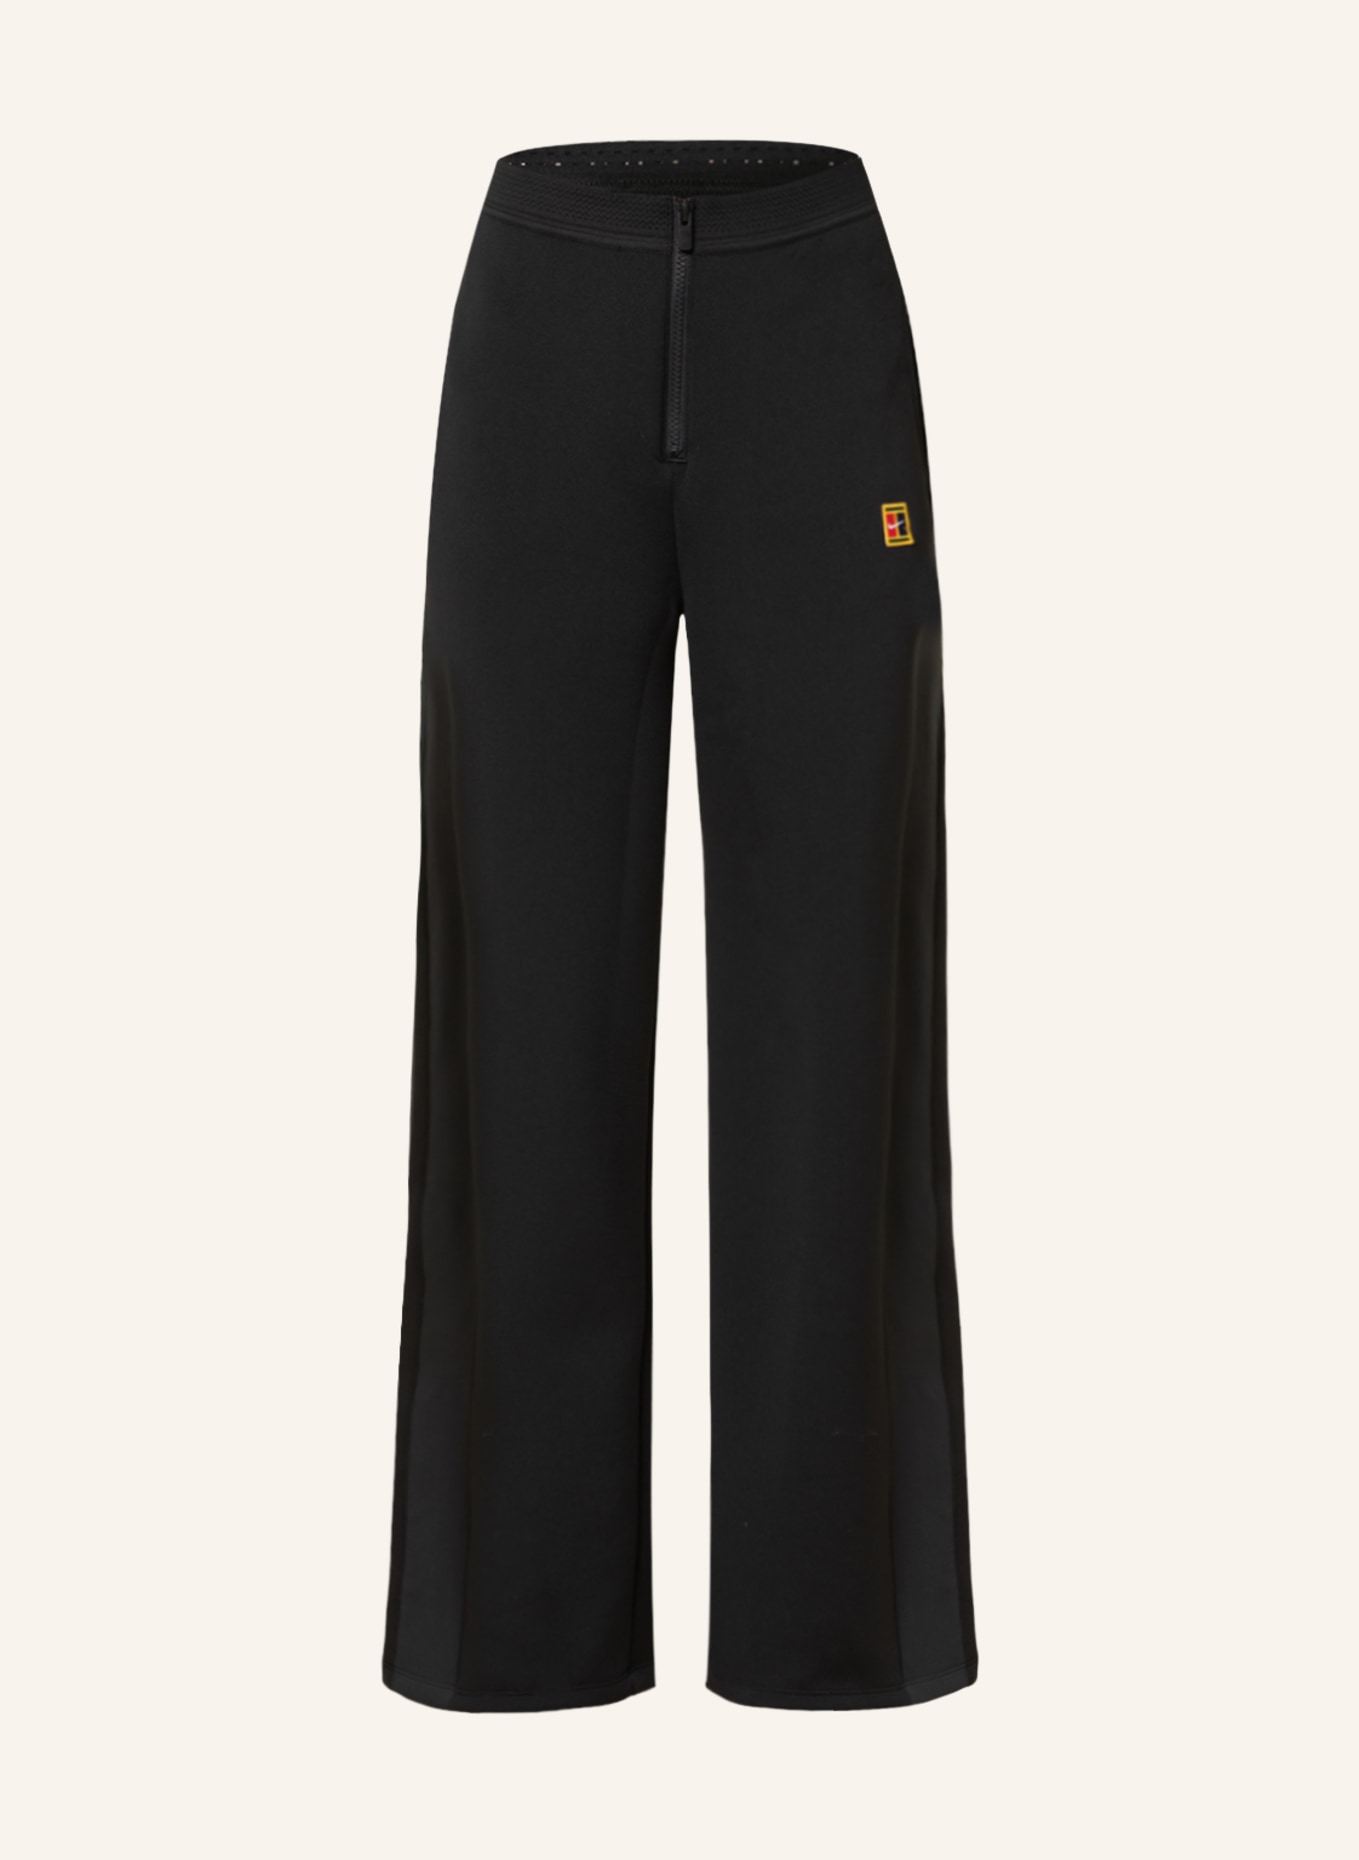 Nike Tennis trousers COURTDRI-FIT HERITAGE with mesh, Color: BLACK (Image 1)